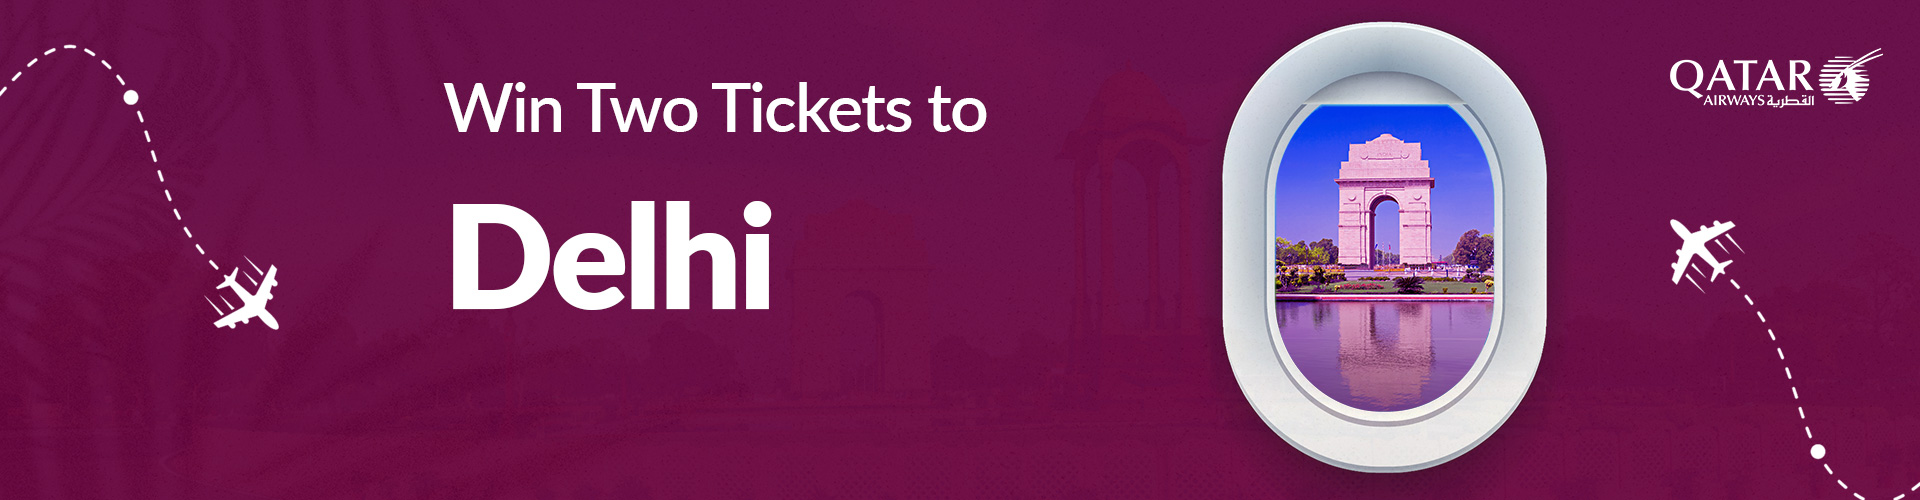 WIN a Pair of Tickets to Delhi Courtesy of Qatar Airways and Brightsun Travel 